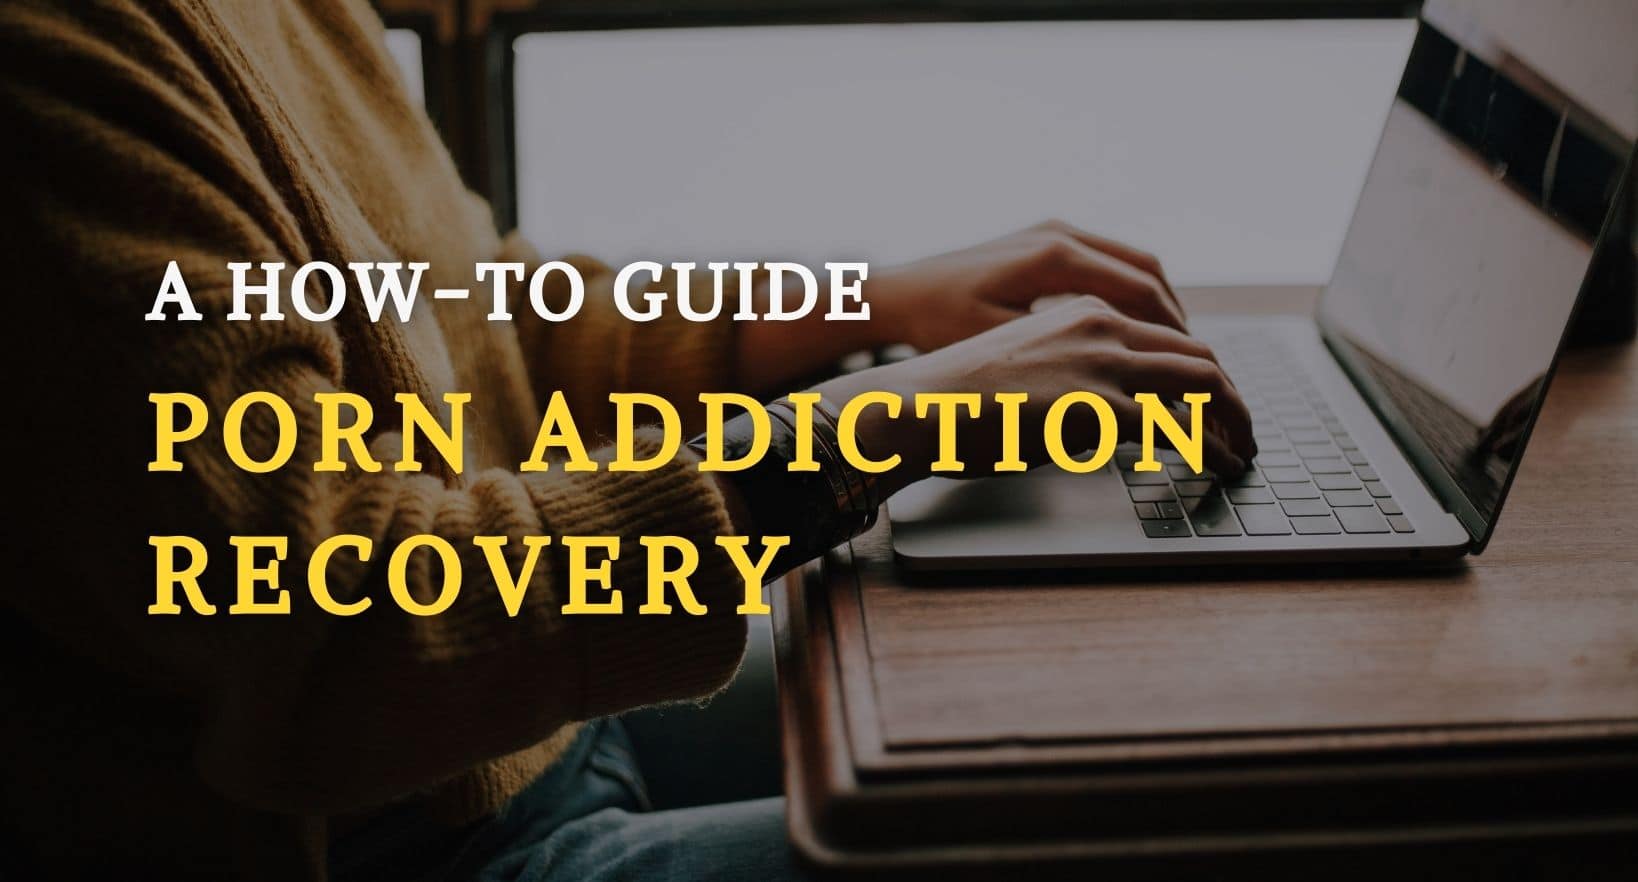 The best how-to guide for recovery from pornography addiction